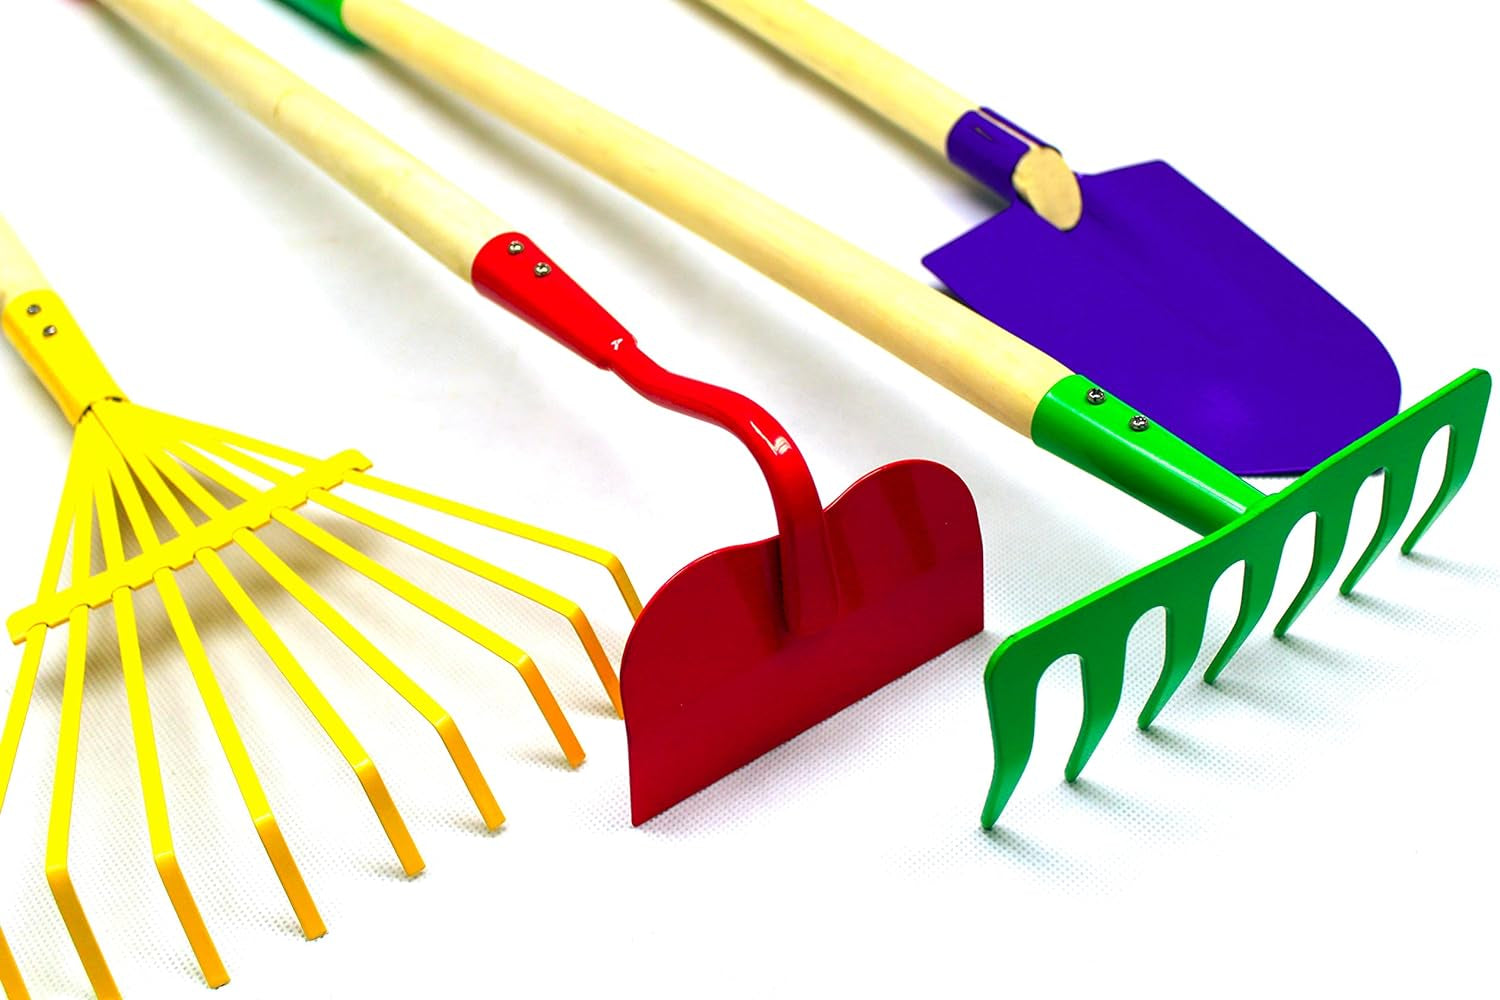 Justforkids Kids Garden Tool Set Toy, Rake, Spade, Hoe and Leaf Rake, Reduced Size , Made of Sturdy Steel Heads and Real Wood Handle, 4-Piece, Multicolored, 5Yr+